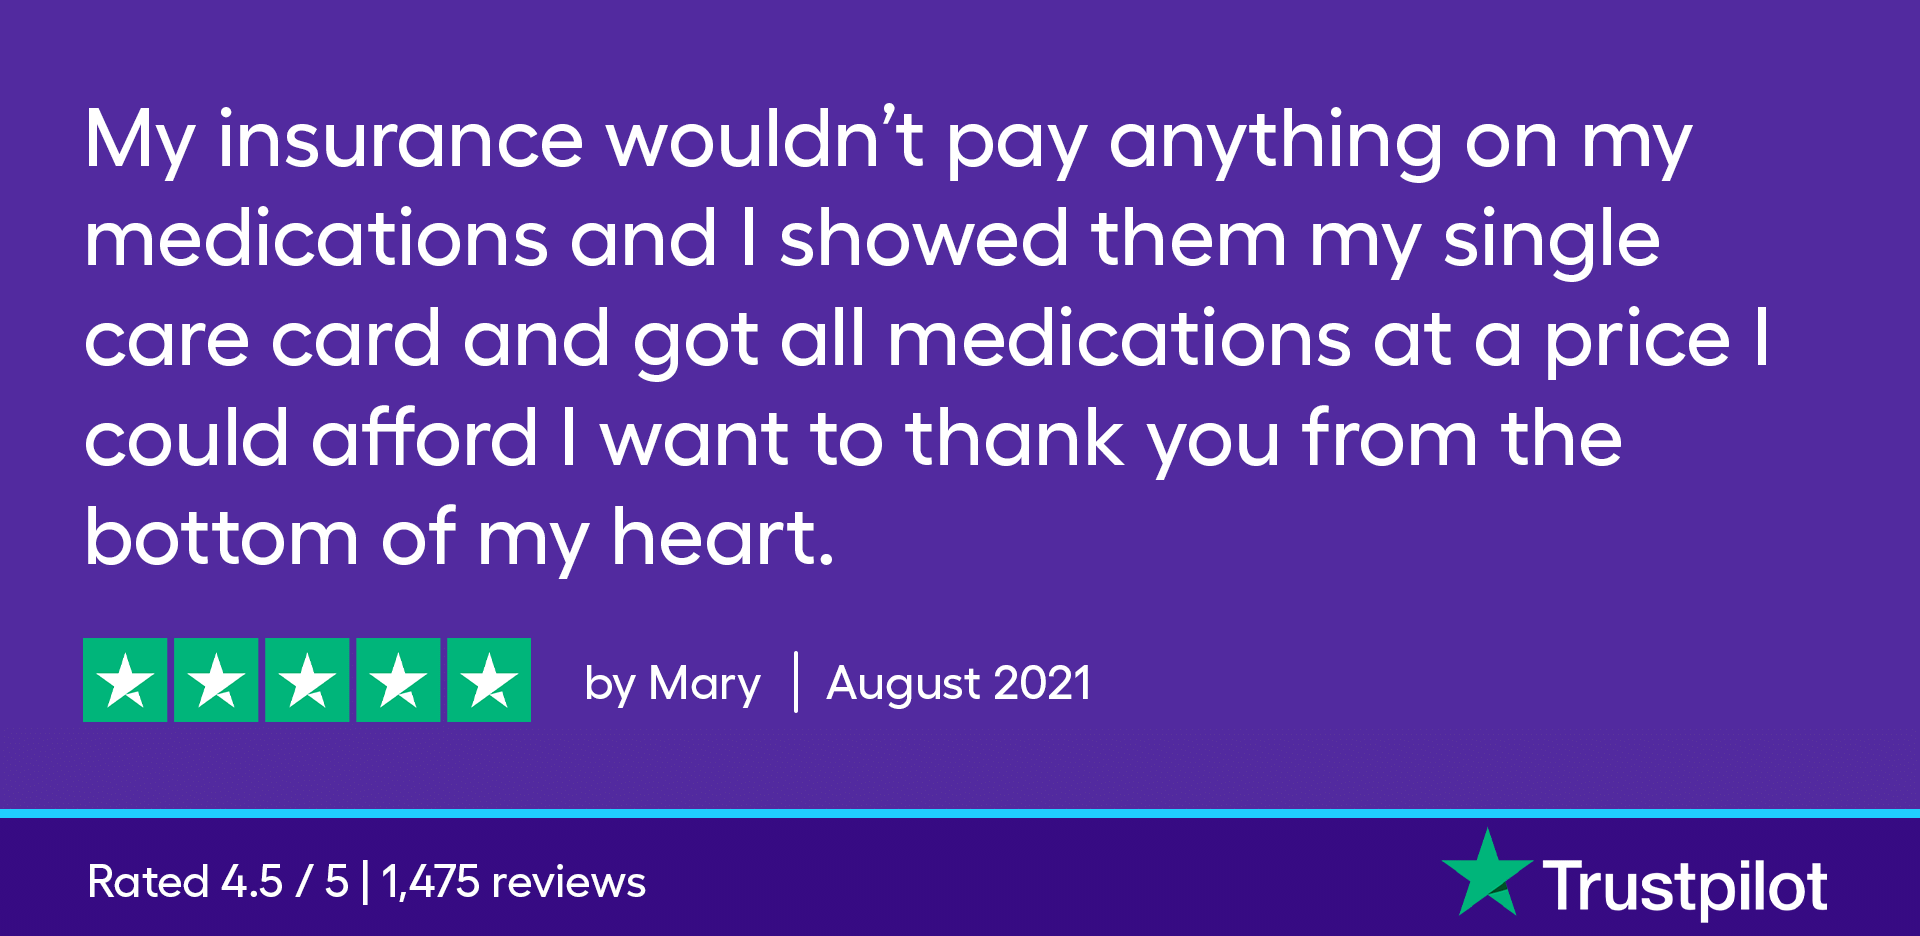 My insurance wouldn't pay anything for my medications. I showed my pharmacy my SingleCare card and got all my medication at a price that I could afford. I want to thank you from the bottom of my heart. 